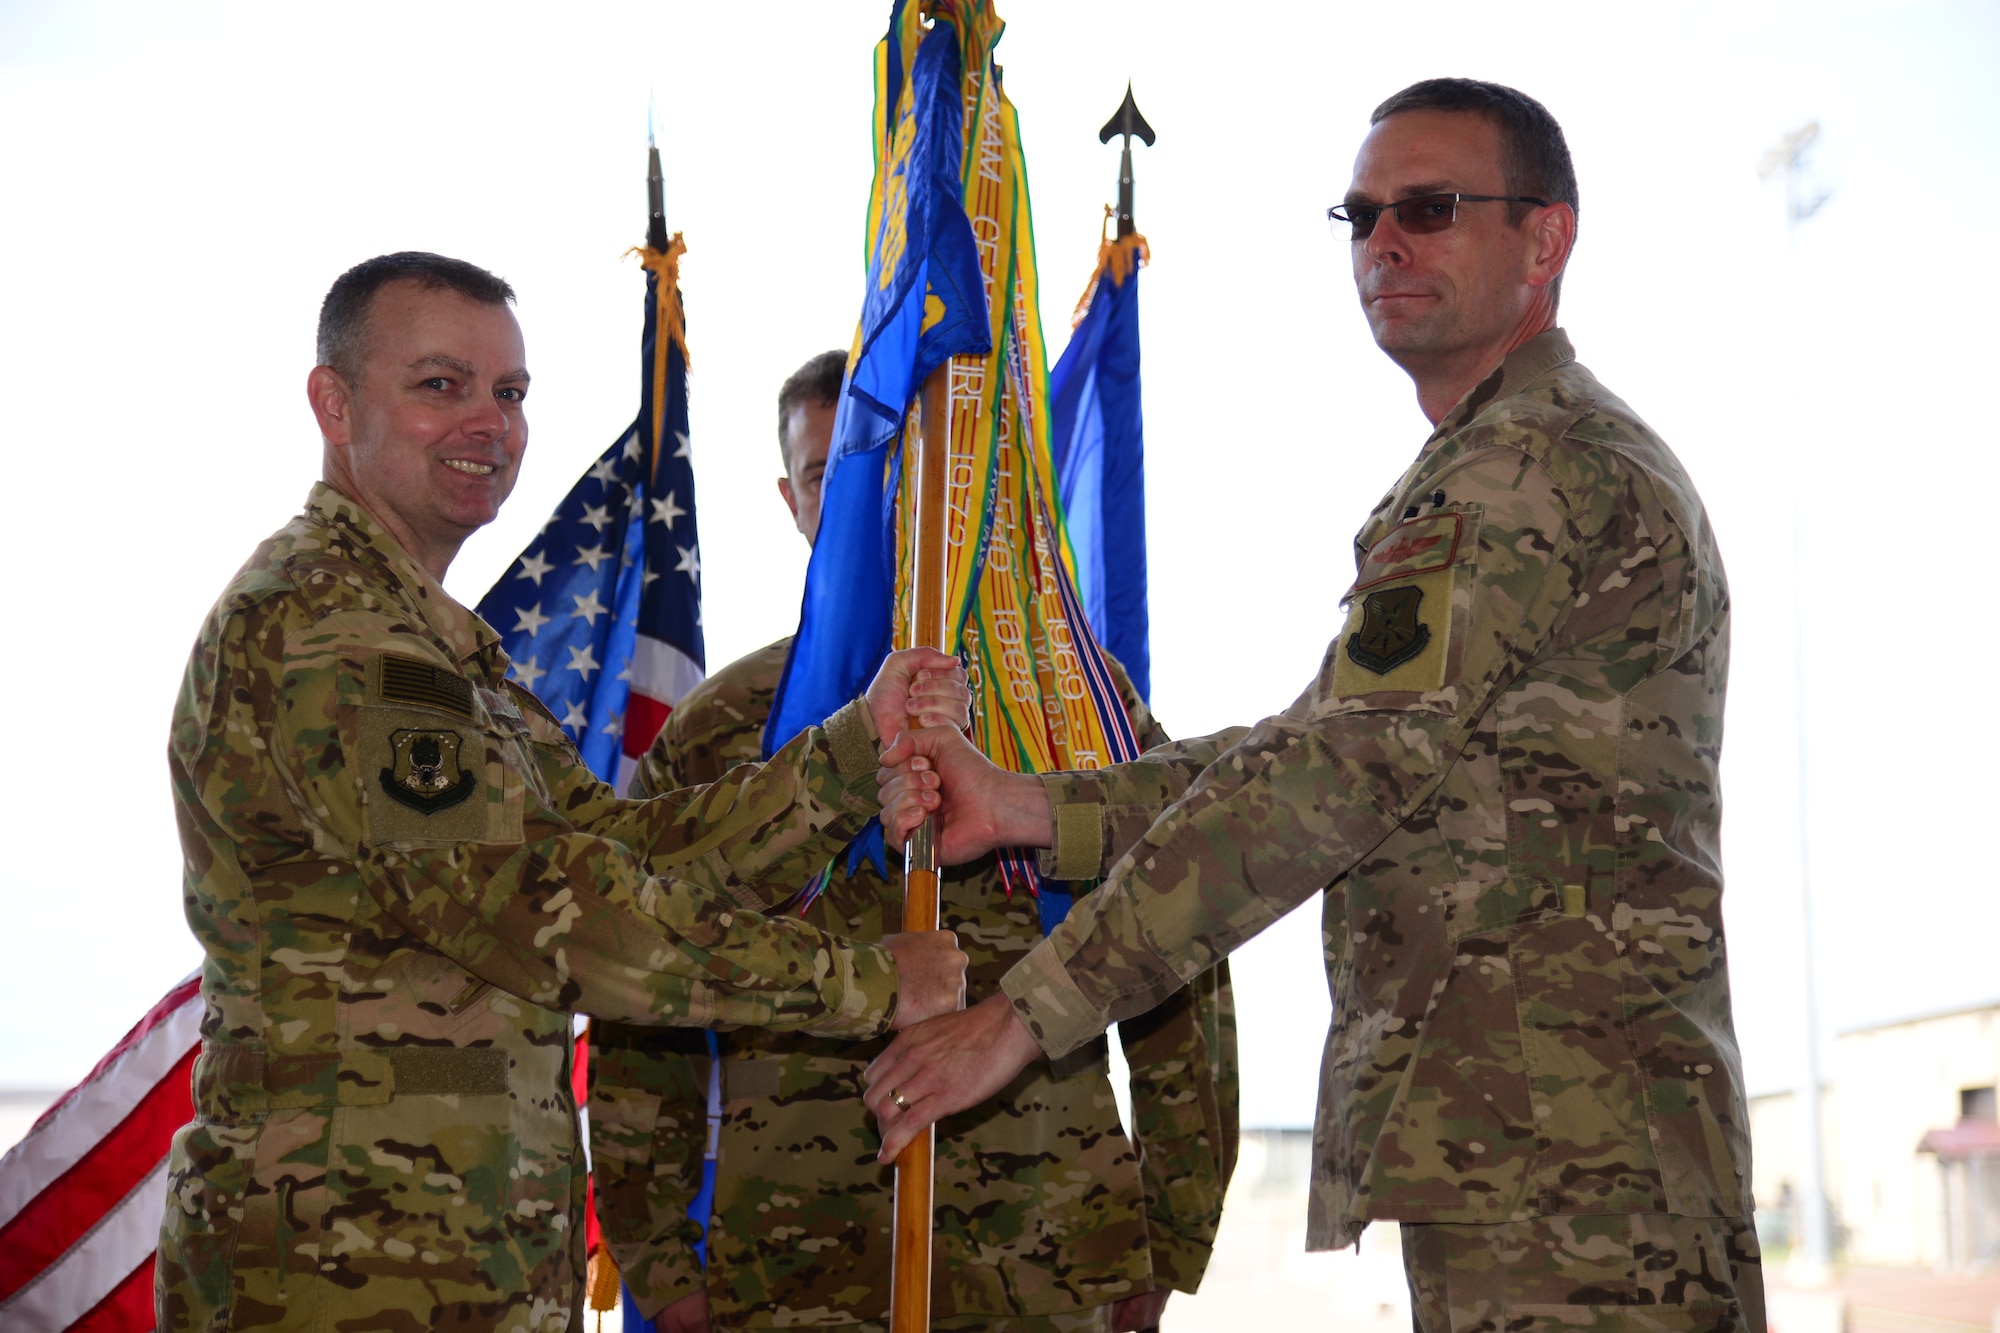 Lt. Col. Bryan Tuinman, right, accepts command of the 40th Helicopter Squadron from Col. Joshua Bowman, 582nd Helicopter Group commander, during an assumption of command ceremony June 22, 2018, at Malmstrom AFB, Mont.